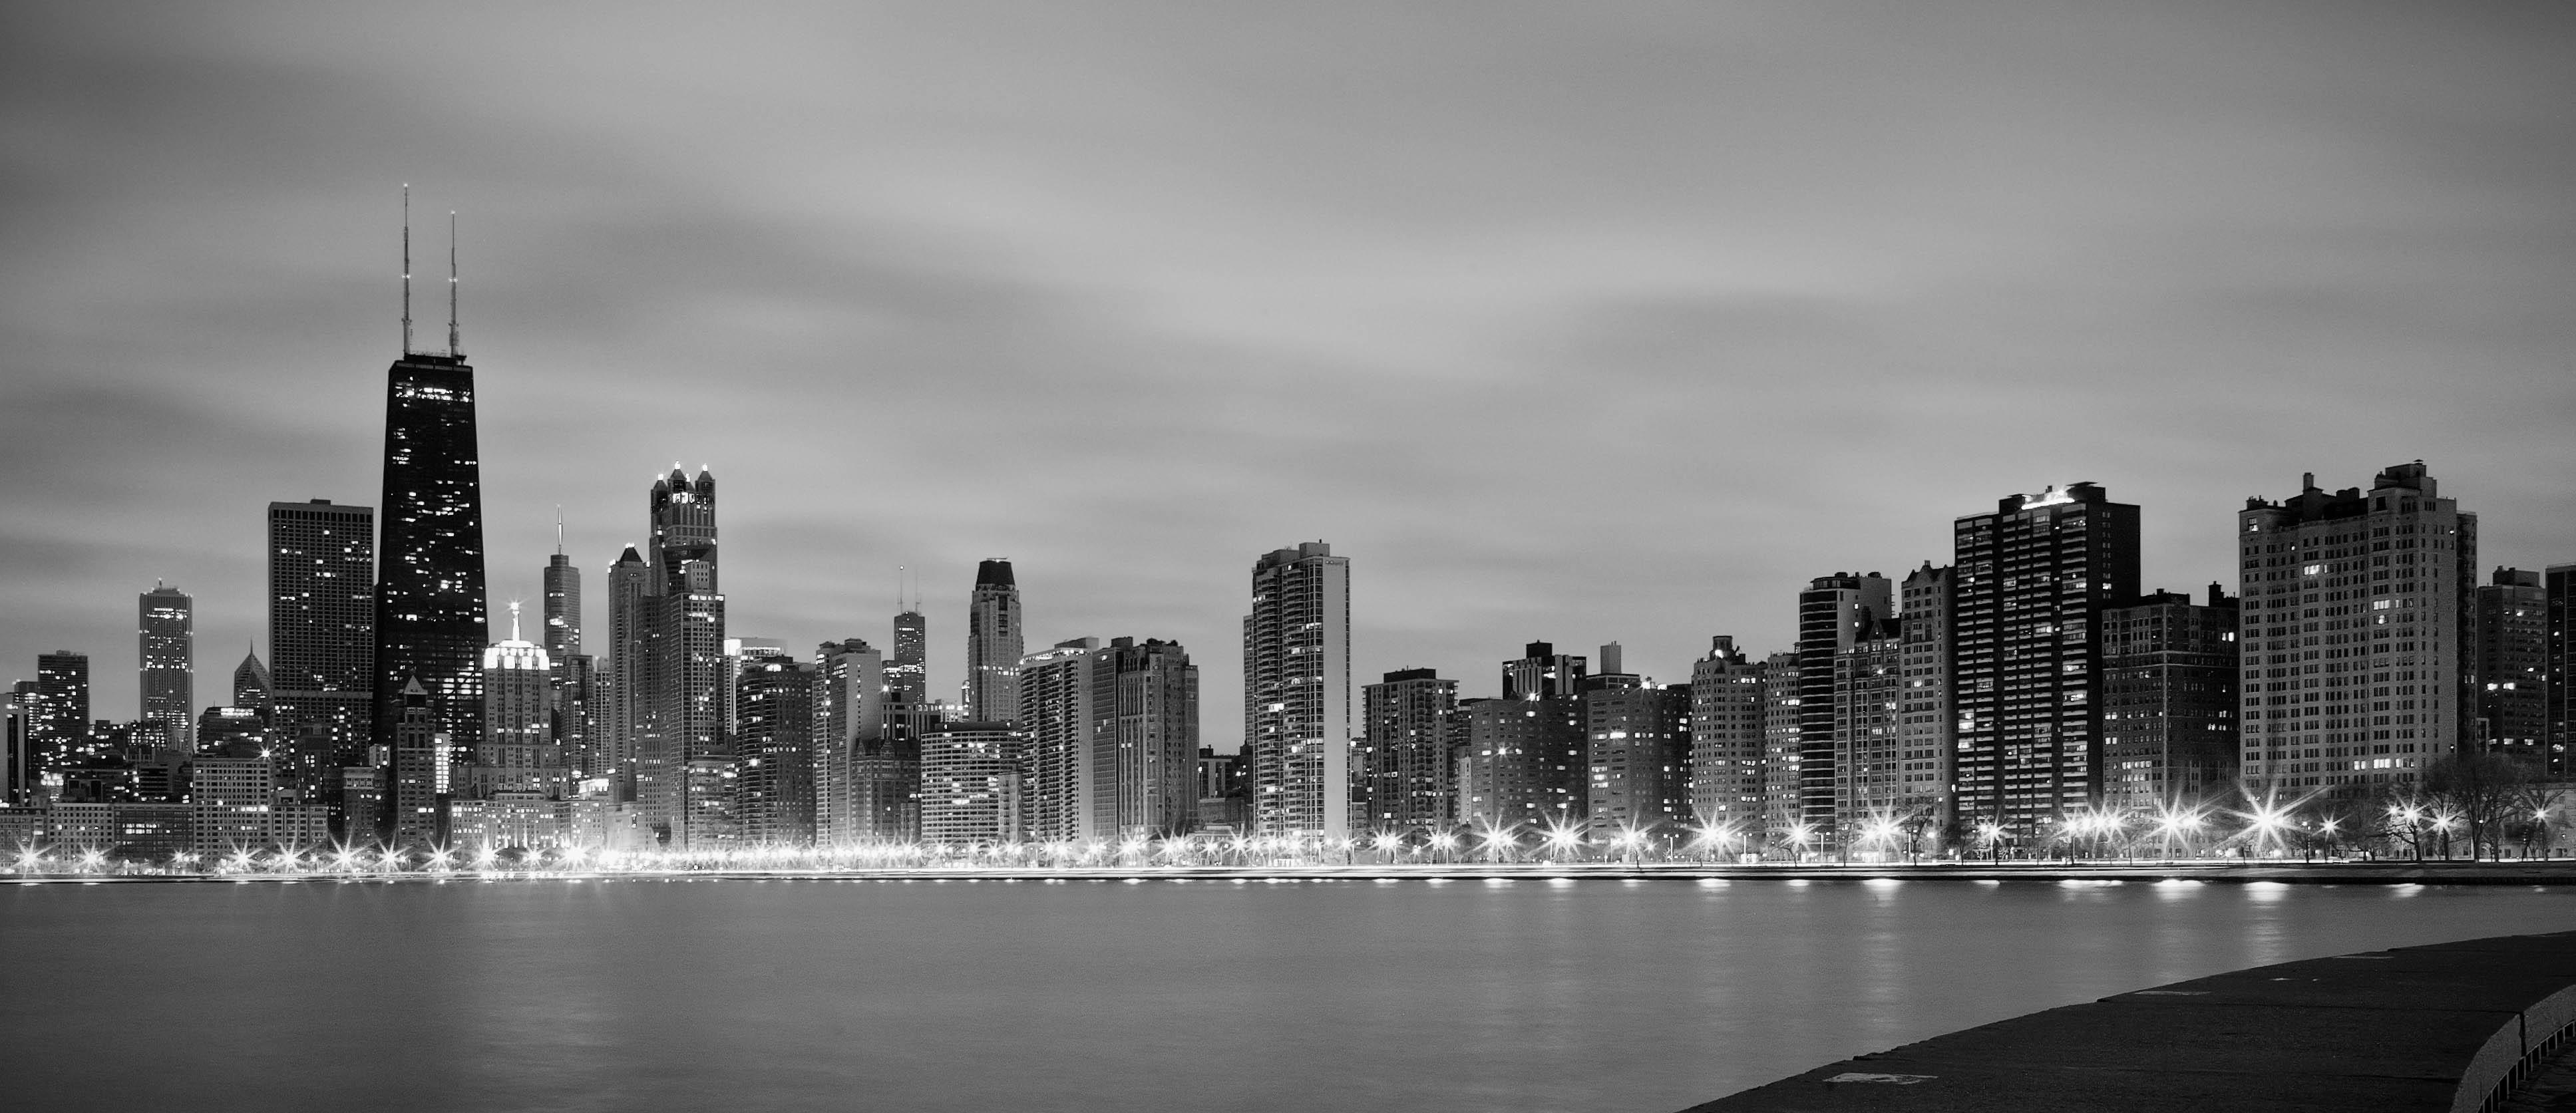 A black and white photo of the city - Chicago